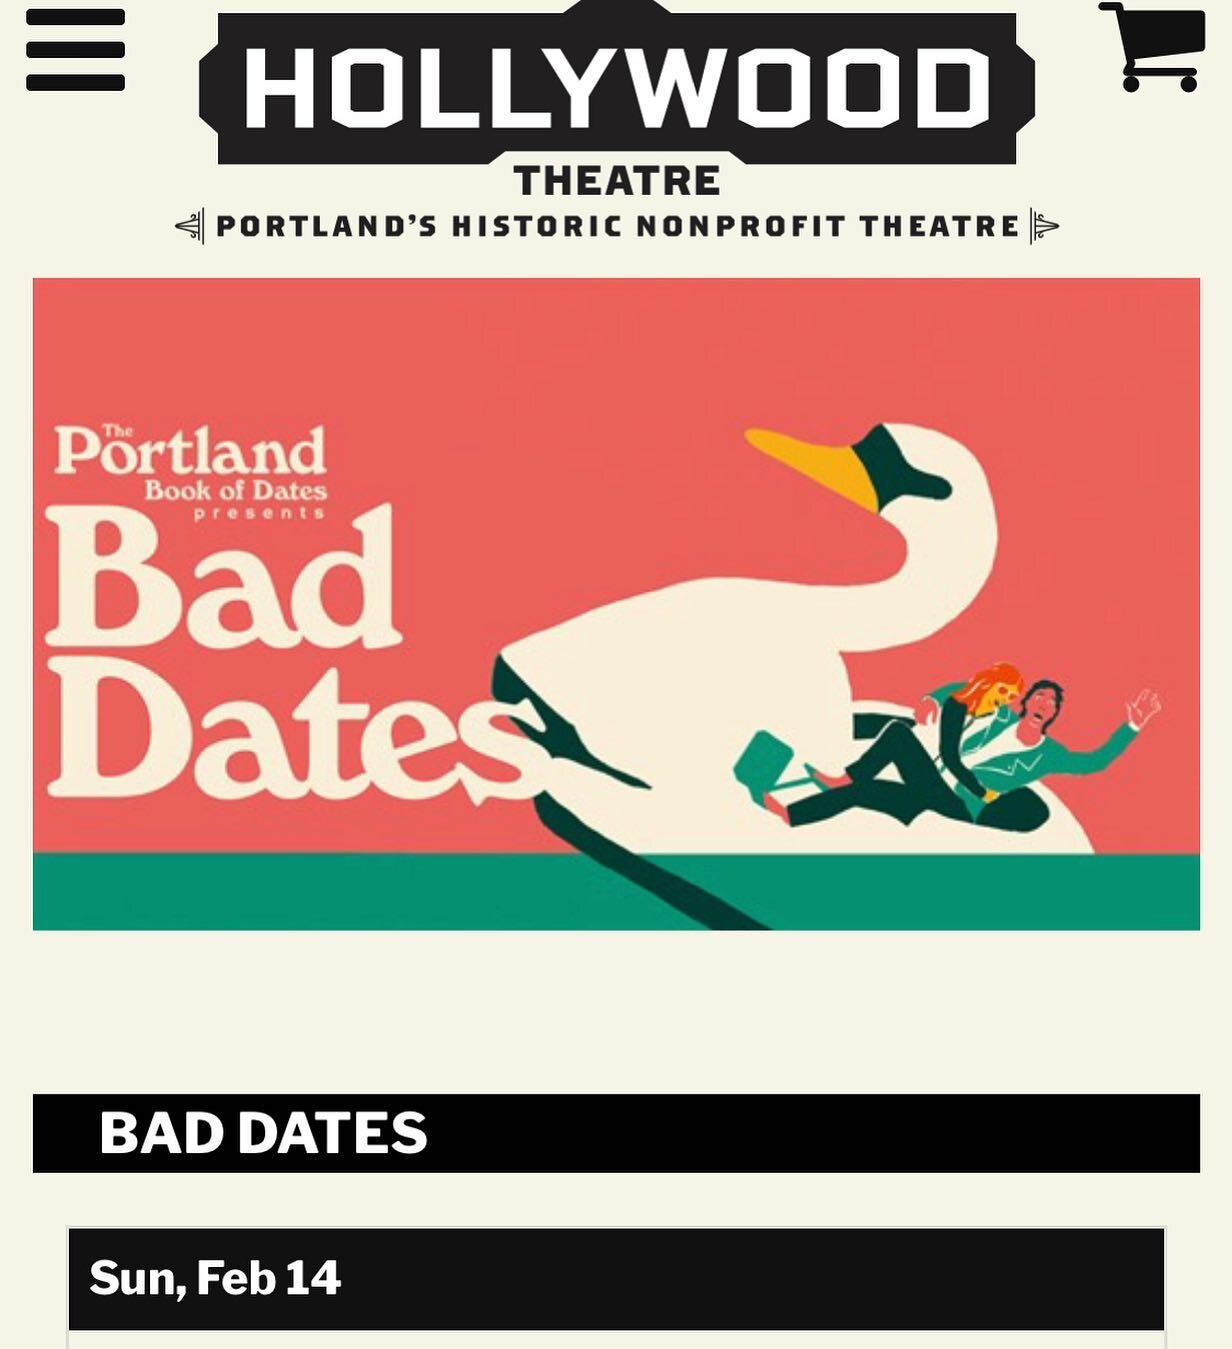 Do you have plans tonight?! Ready to laugh and commiserate about your bad dates? Looking for some good ideas for planning hot dates? Get your tix and support The Hollywood Theater and hot off the press, The Portland Book of Dates 😘